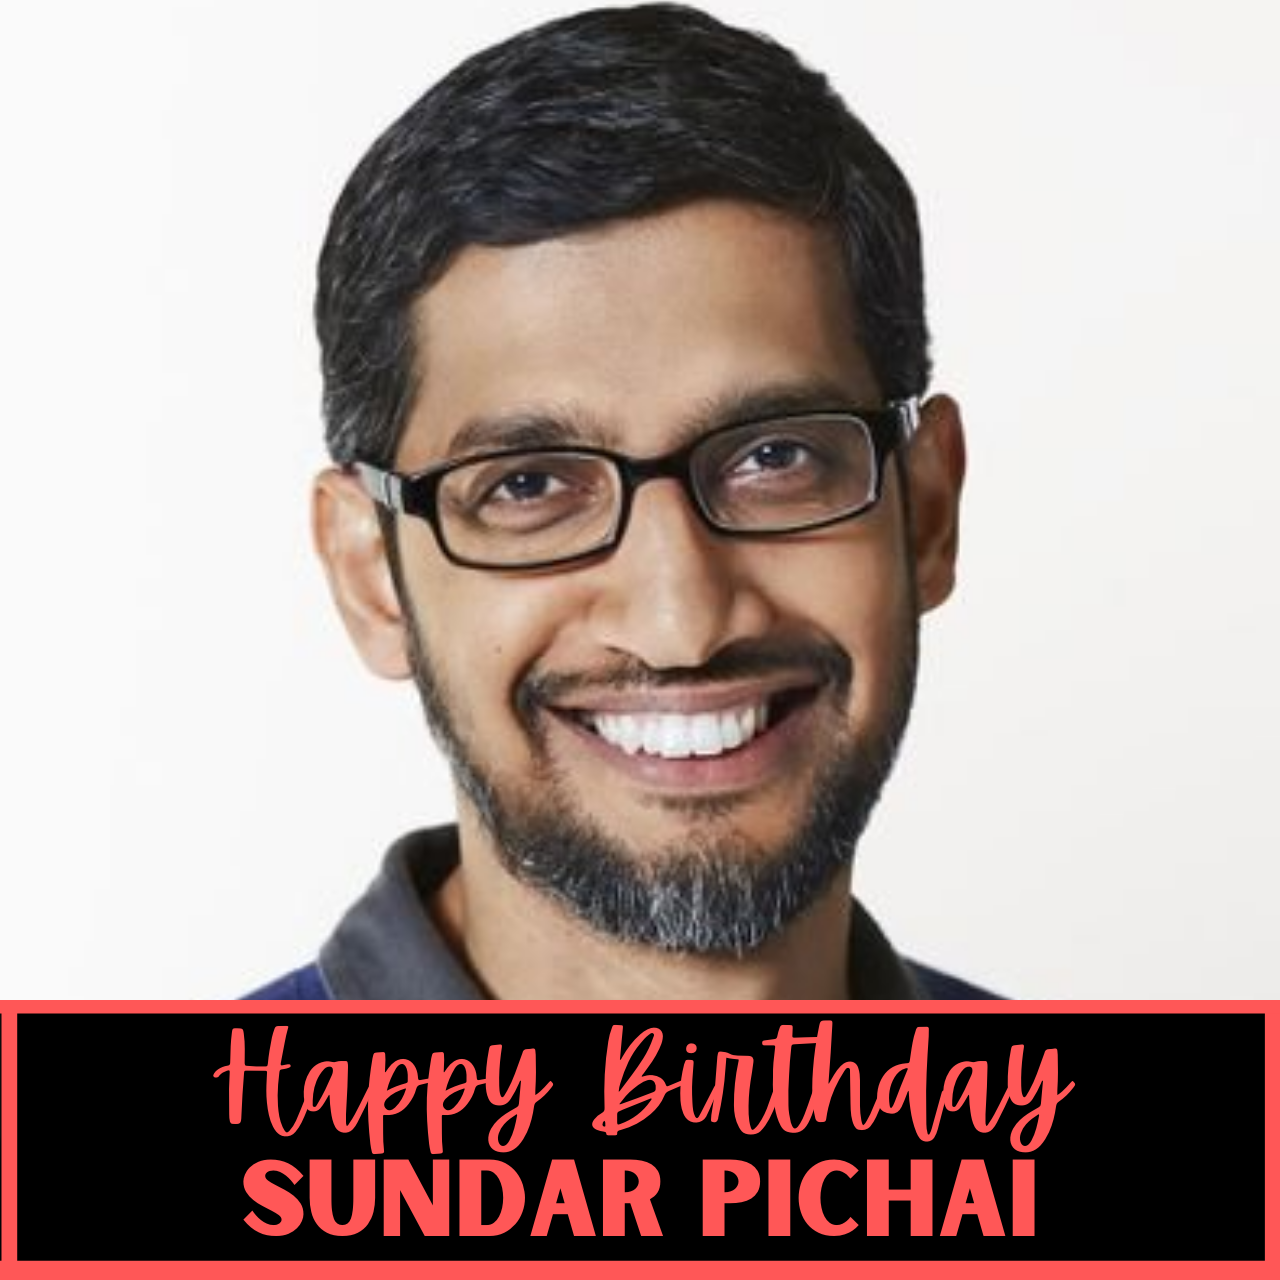 Happy Birthday Sundar Pichai Wishes, Images (photos), Greetings, Messages, and WhatsApp Status Videos to greet Google's CEO